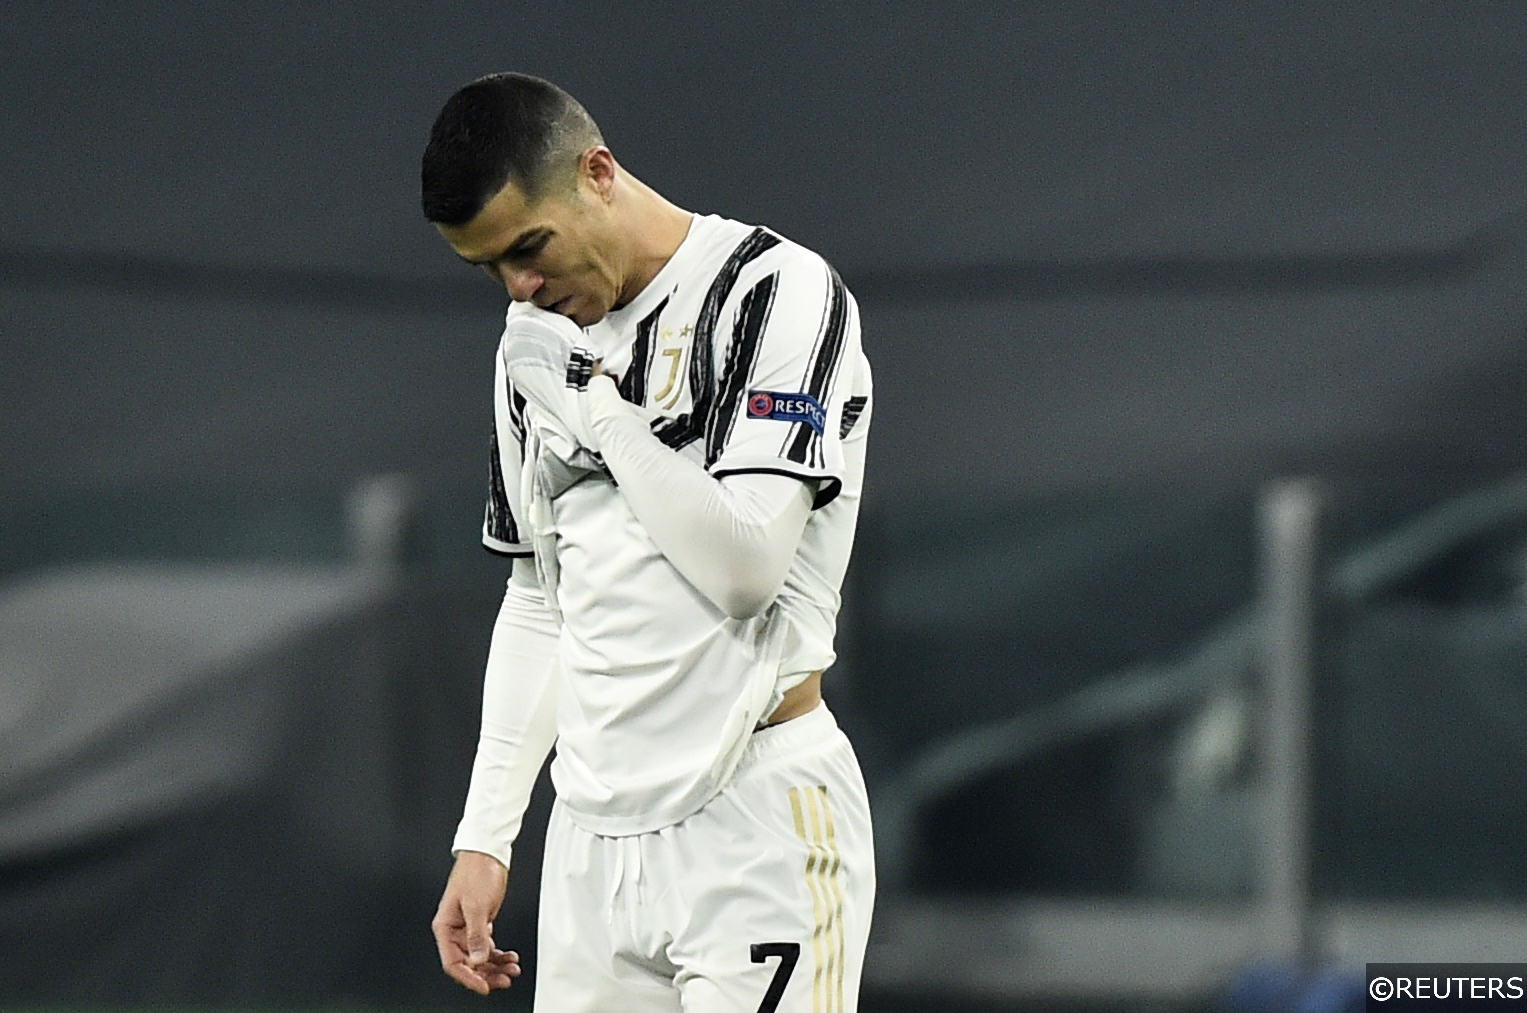 COMPLIANT - Ronaldo as Juventus get knocked out of Champions League by Porto